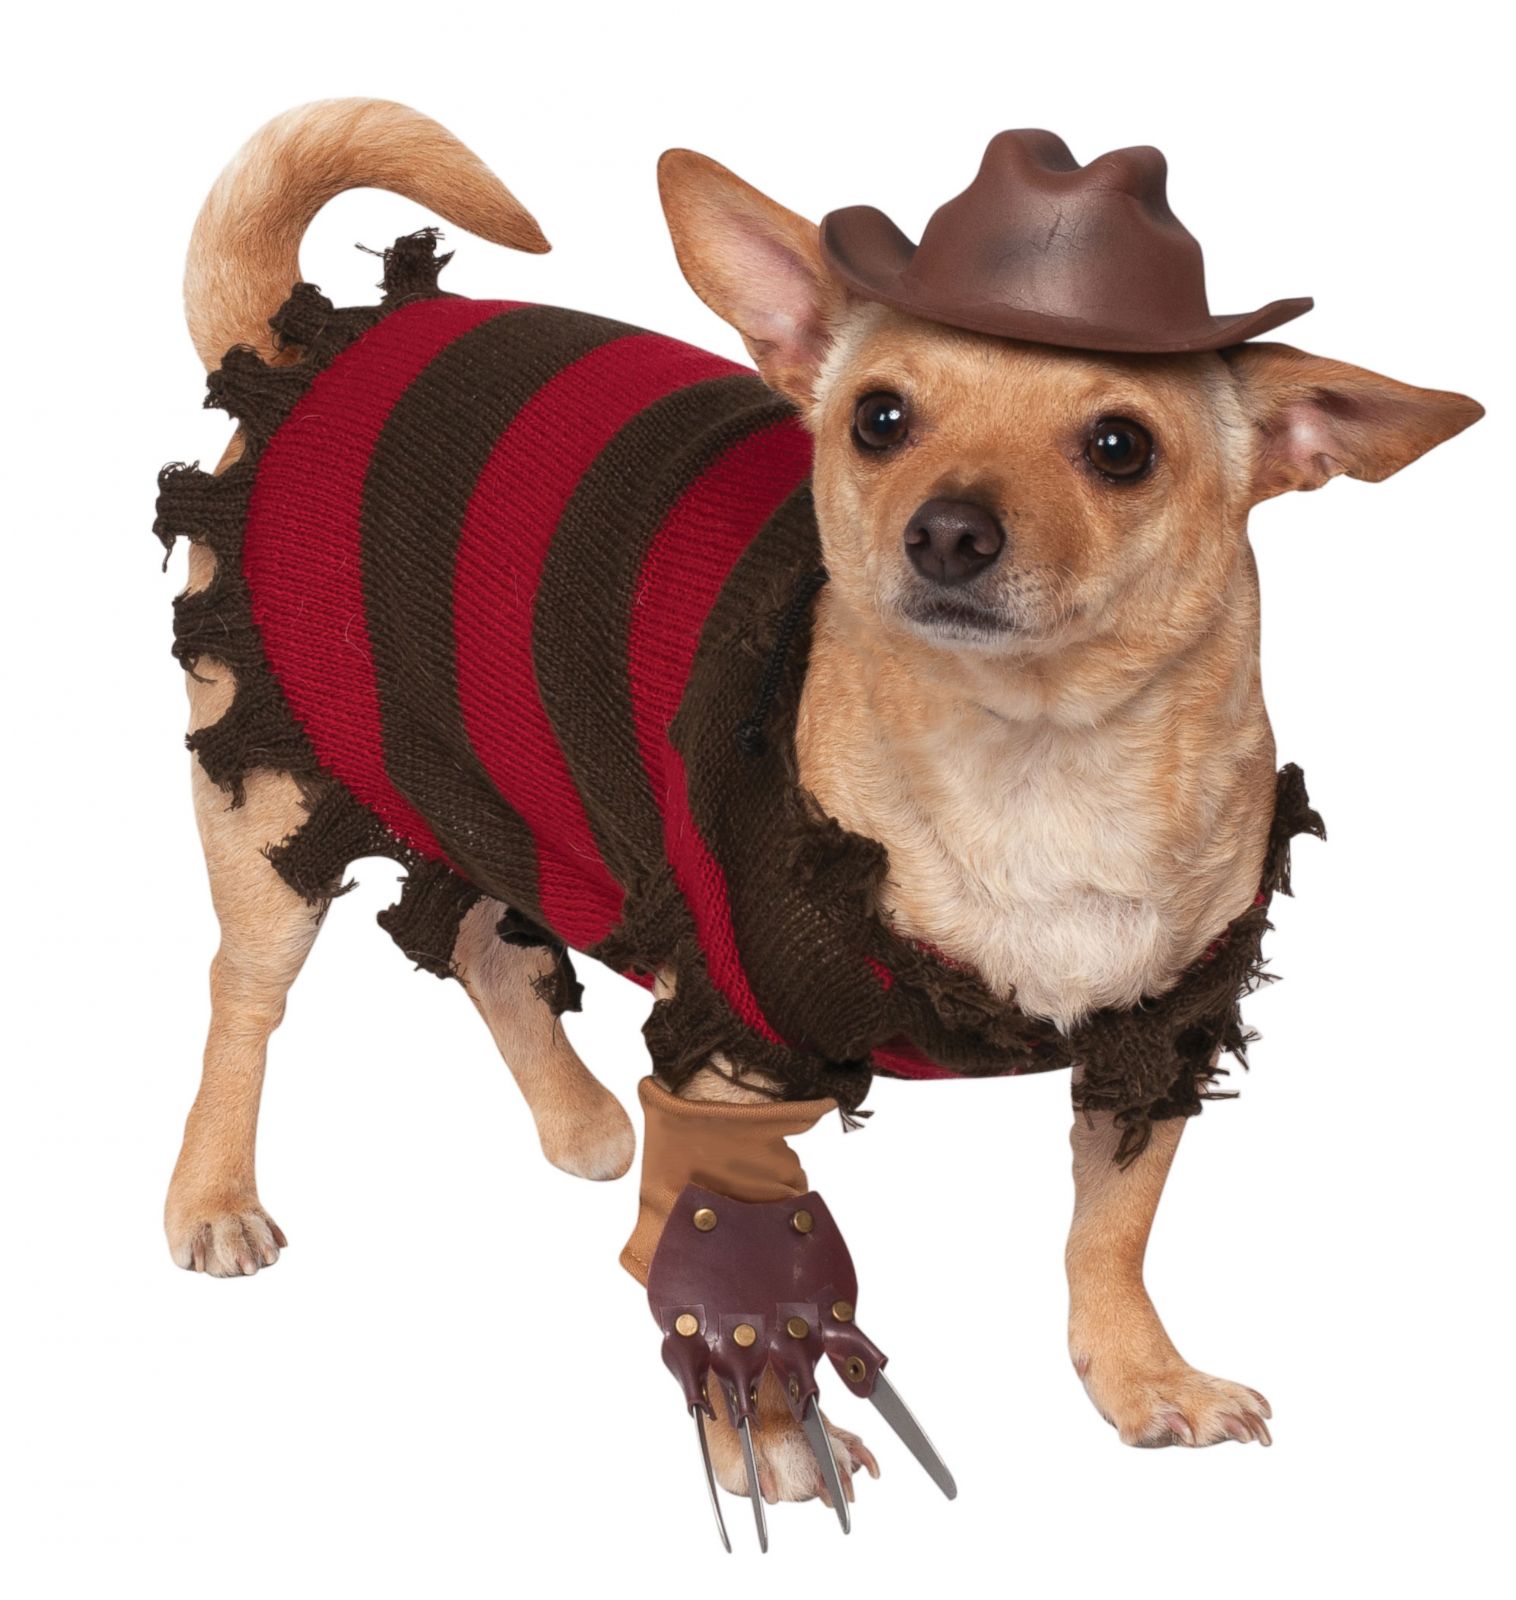 are dogs allowed in spirit halloween